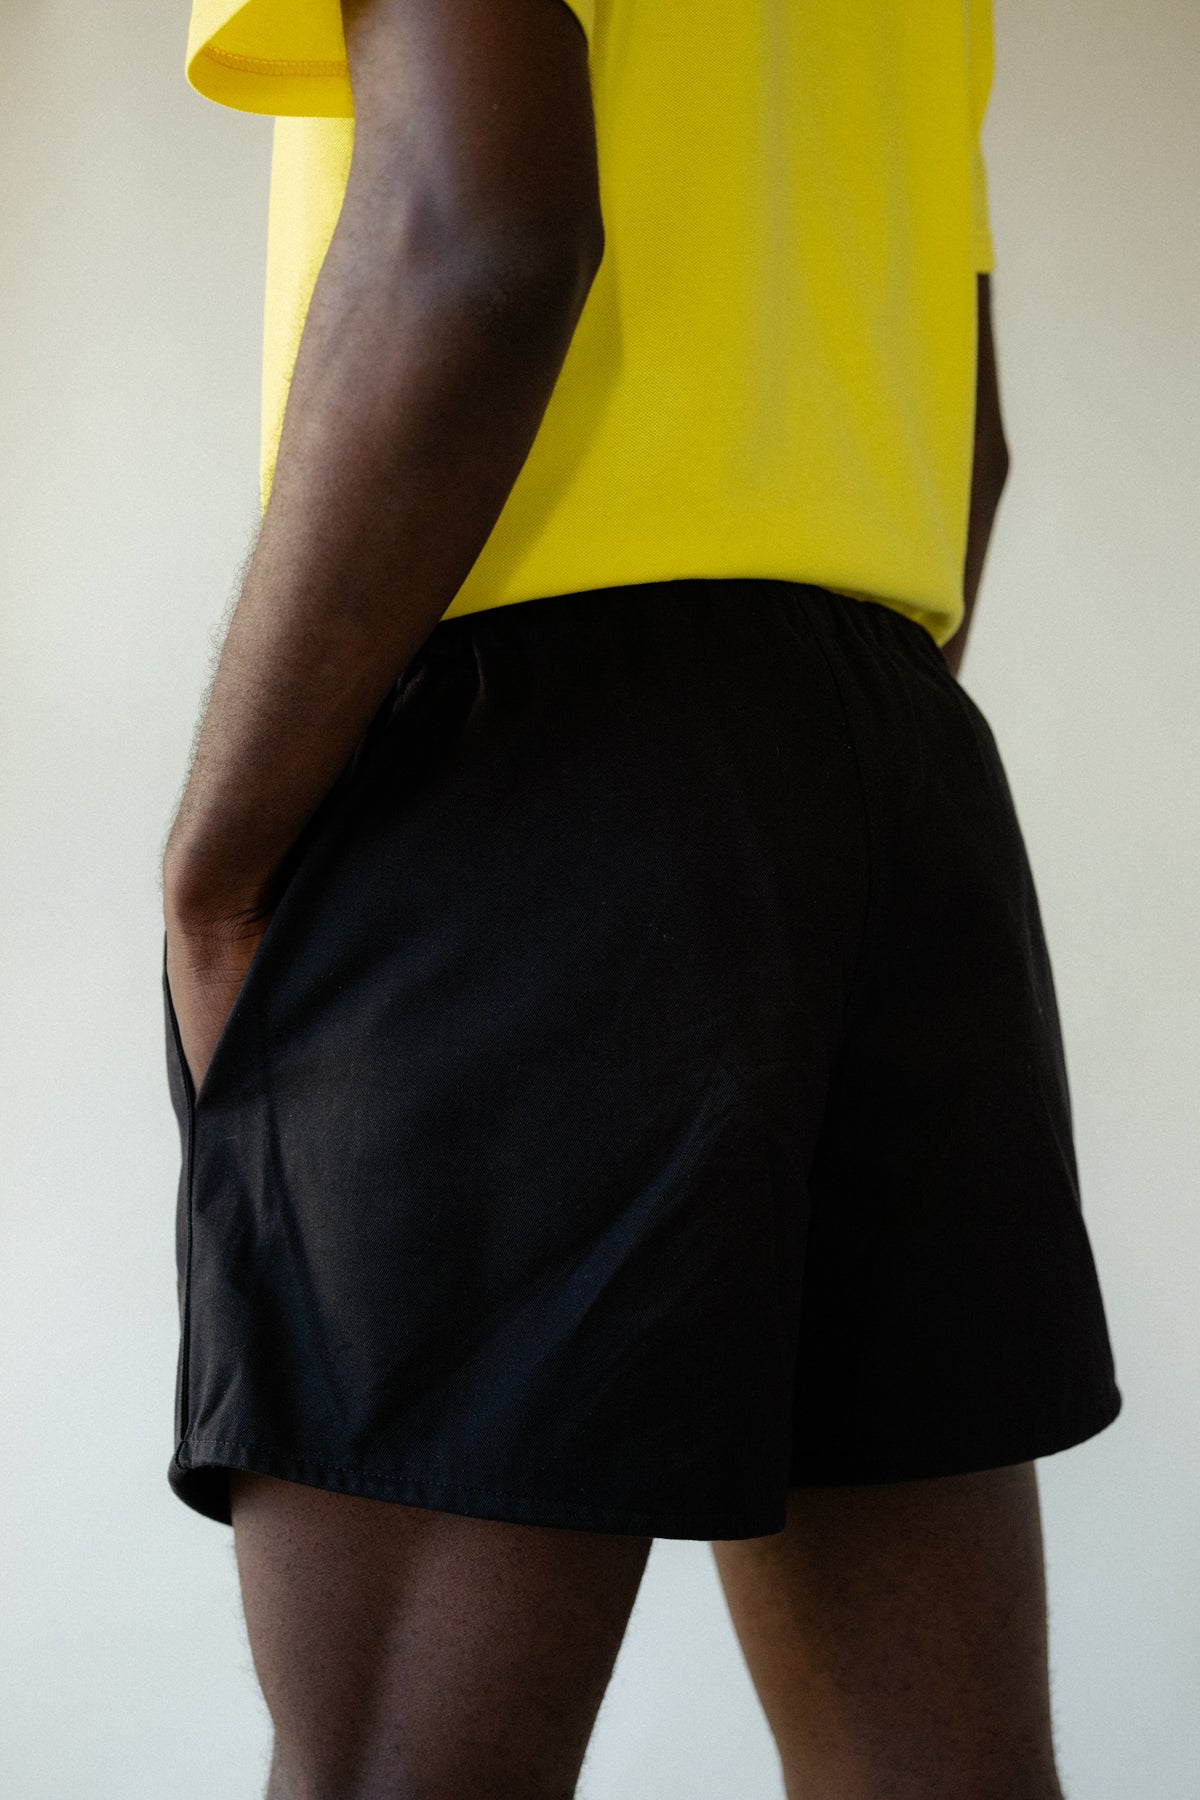 
            Image showing back of black male wearing heavyweight sports short plastic free in black close up